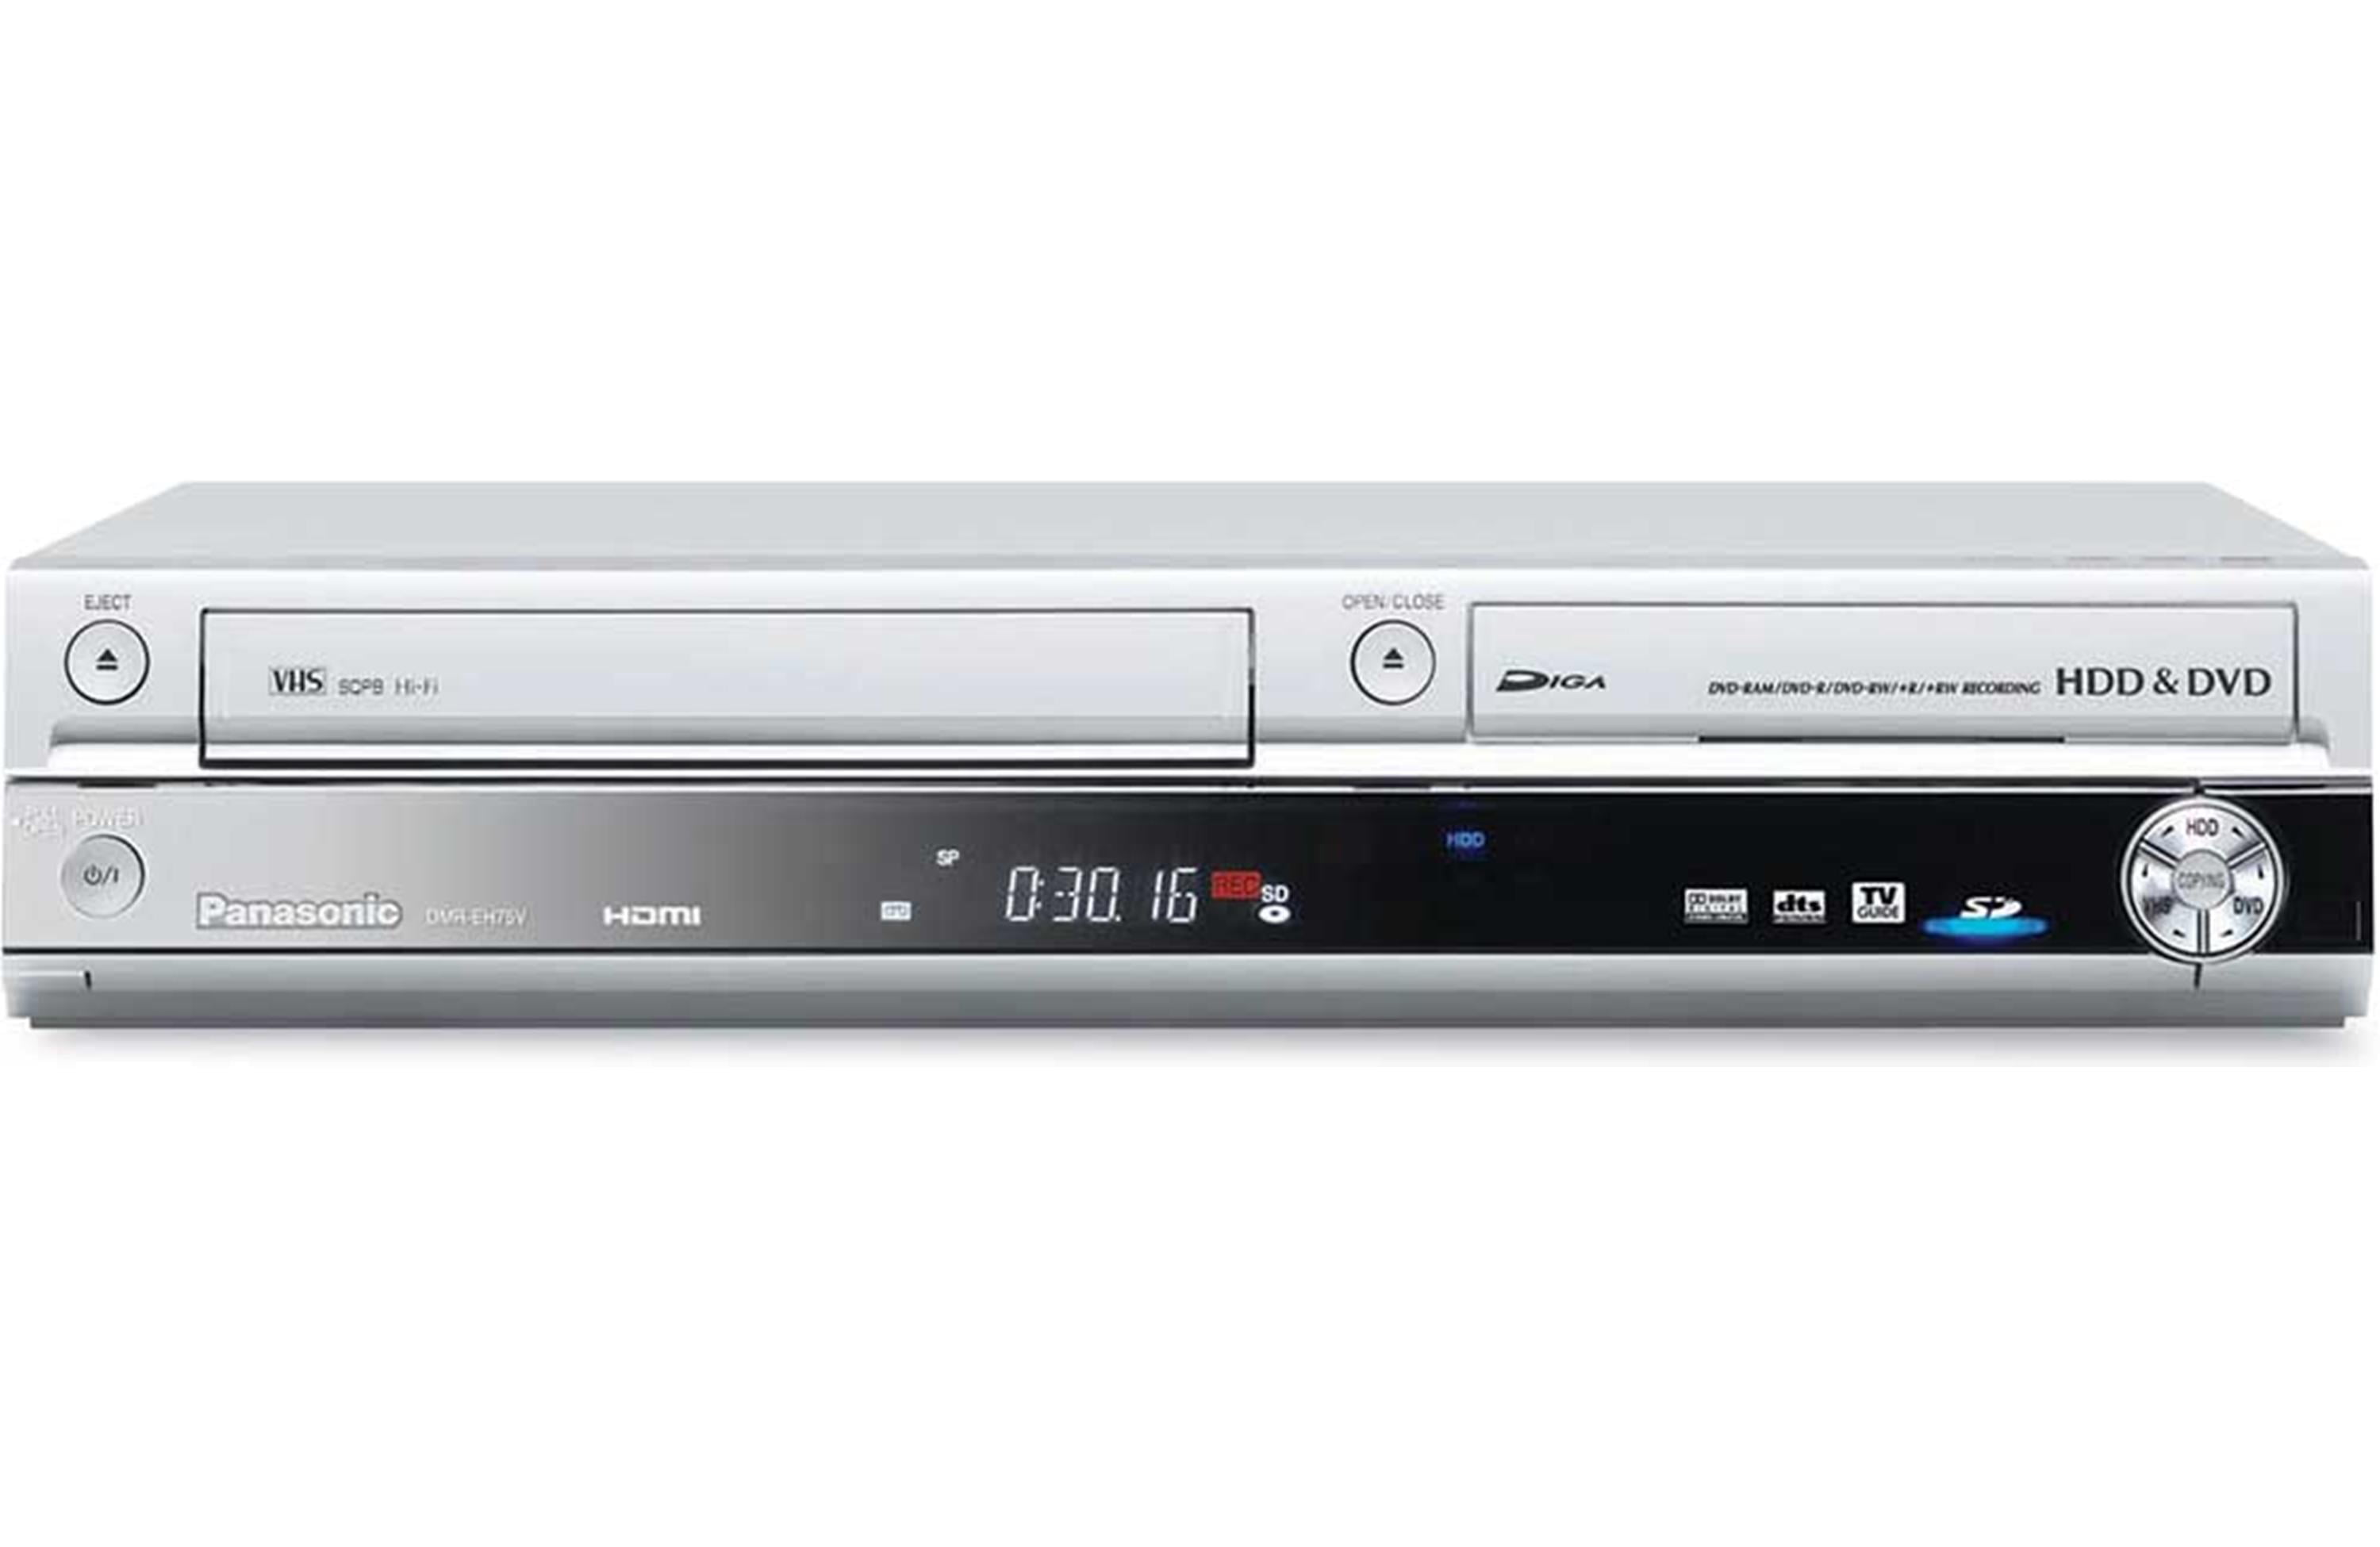 Panasonic DMR-EH75VS DVD Recorder/VCR Combo 80GB Hard Drive. Comes with Remote, Manual, Cables - Walmart.com